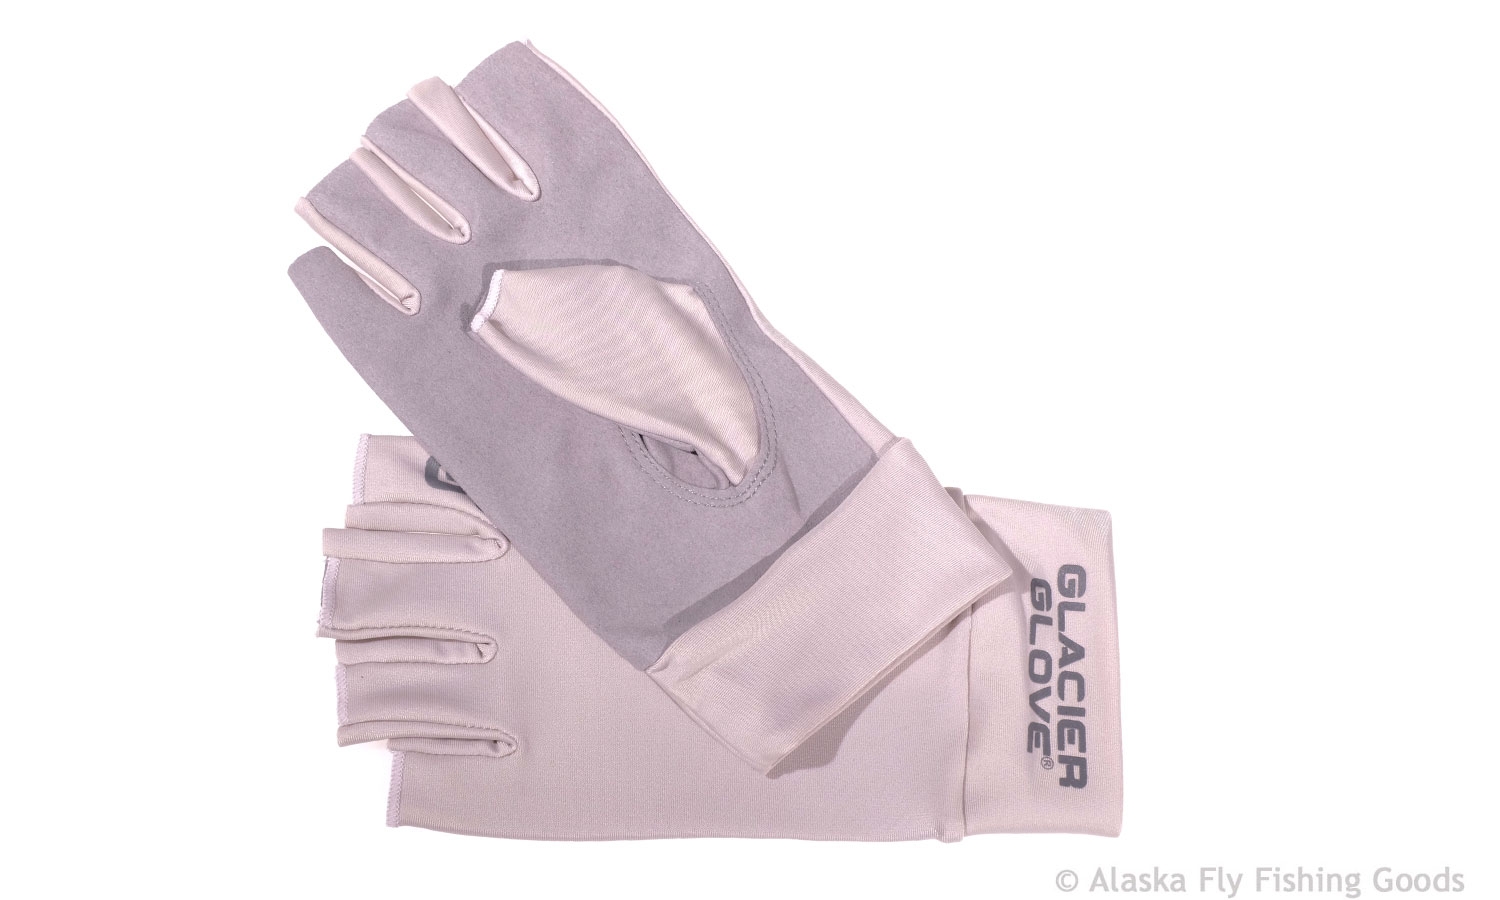 Gloves for Fly Fishing